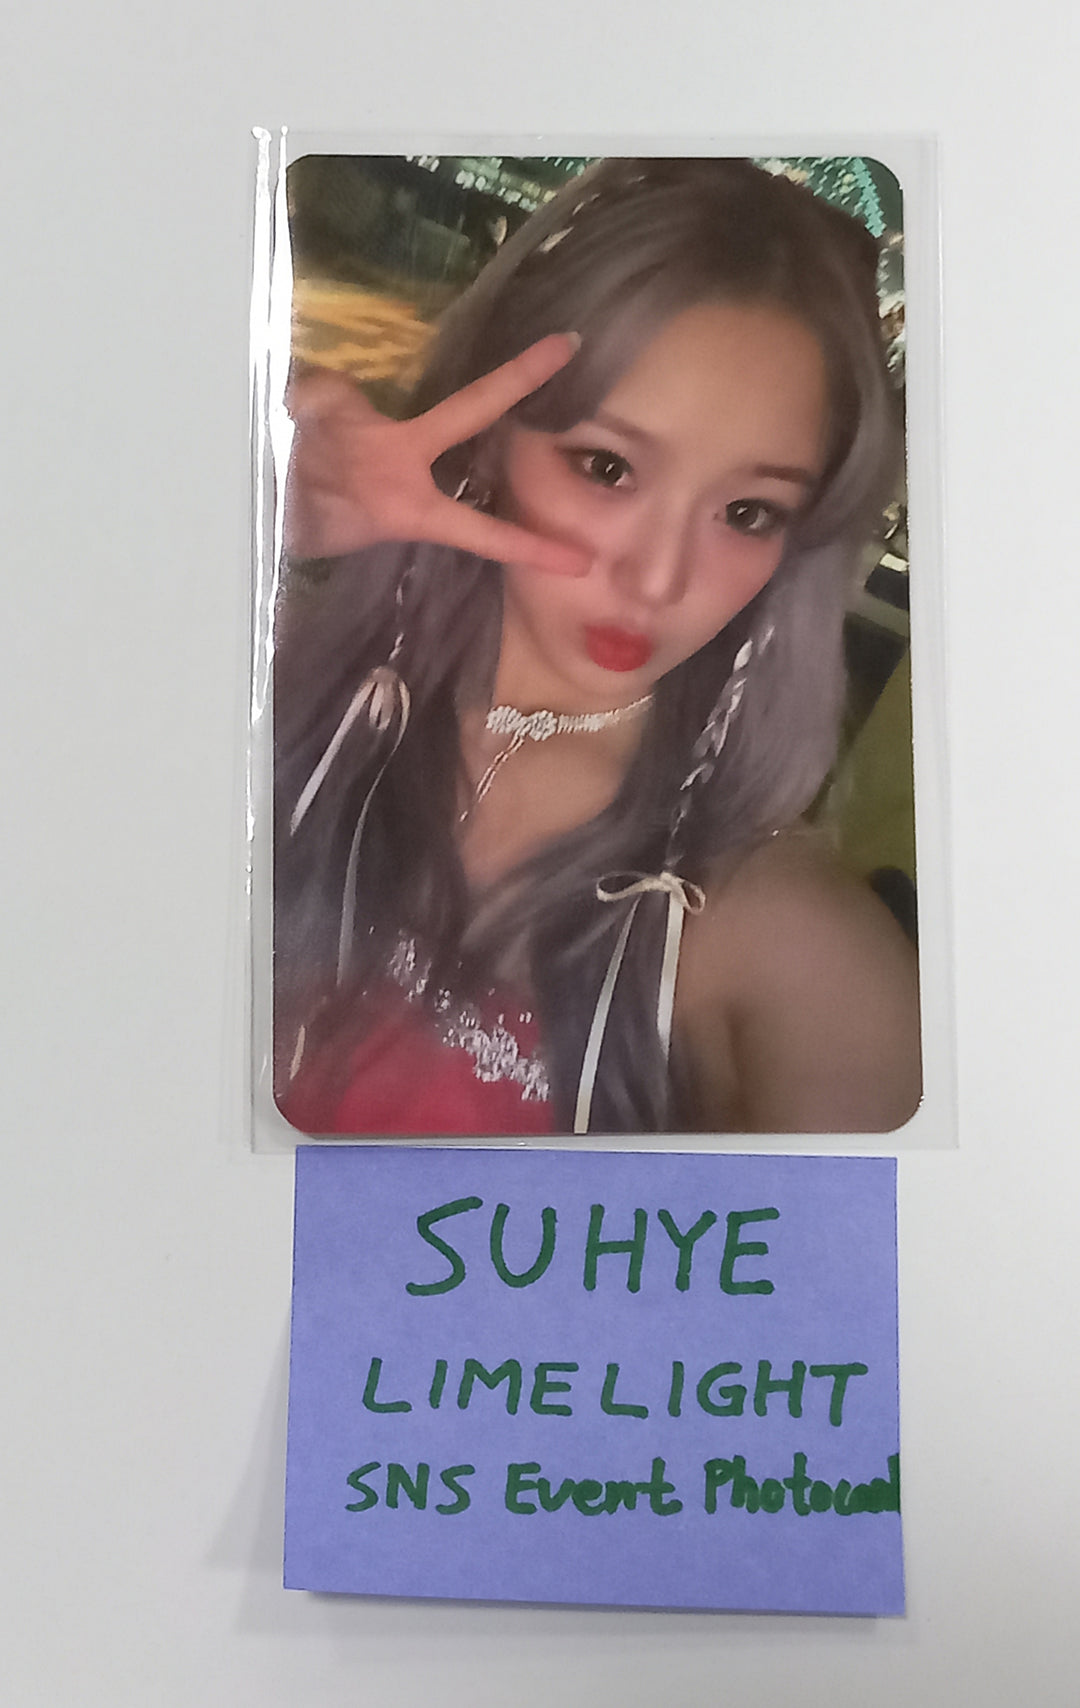 LimeLight - "143 Pop! Up Store" SNS Event Photocard [24.03.08]